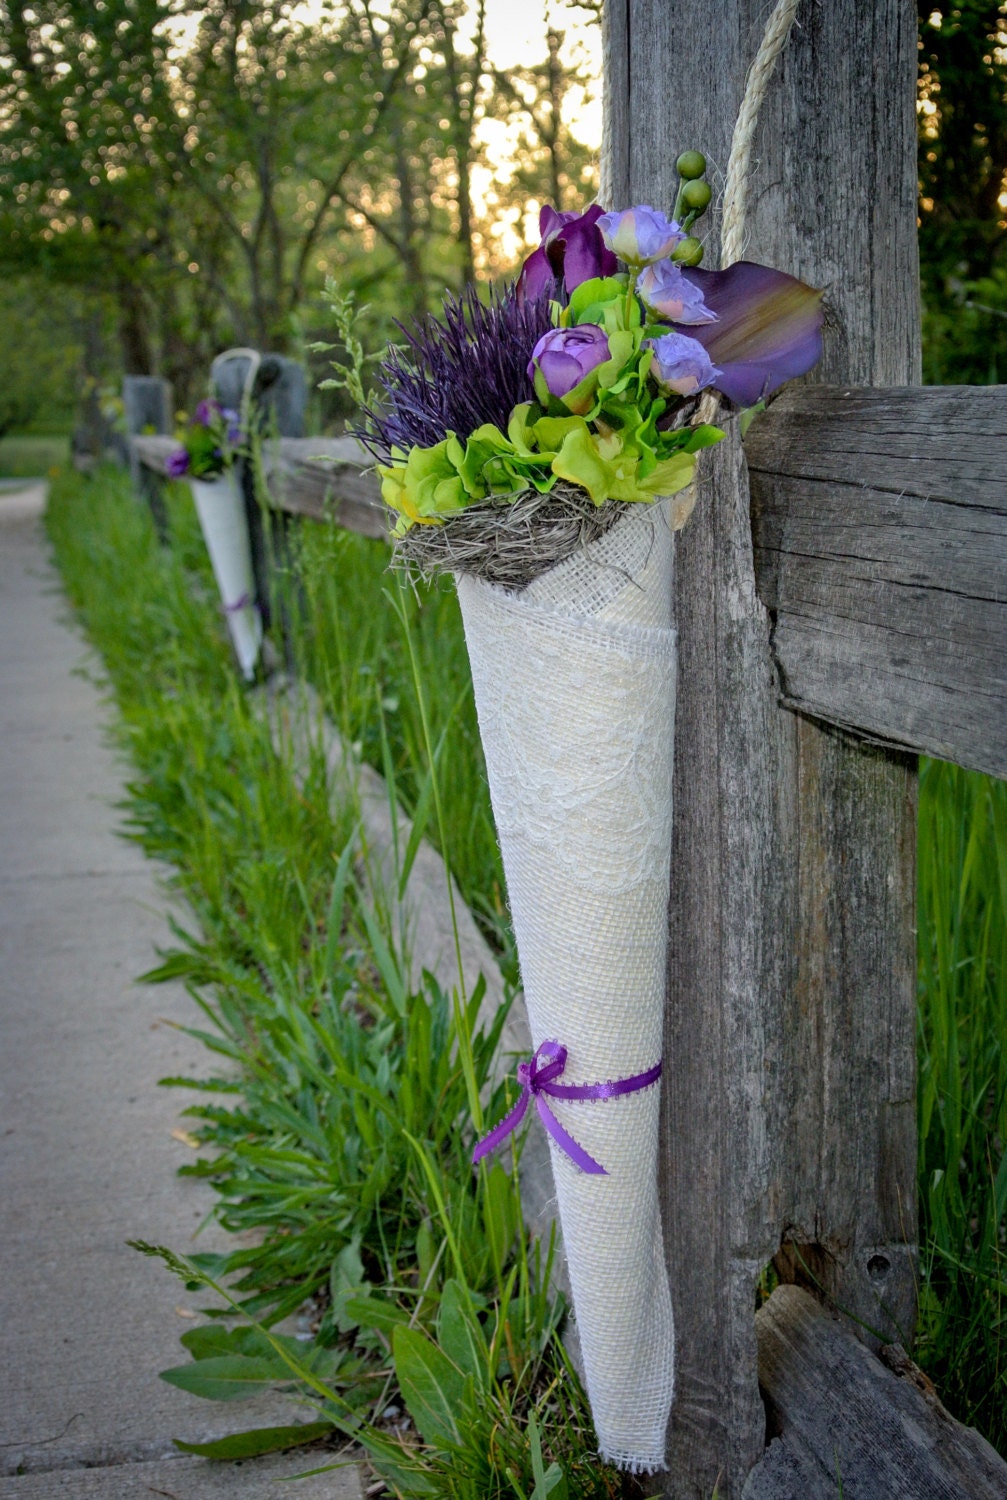 Burlap and Lace Flower Cone Decor with Purple and Lime Green Life-Like Flowers for Aisles, Pews, Chairs Wedding Decor